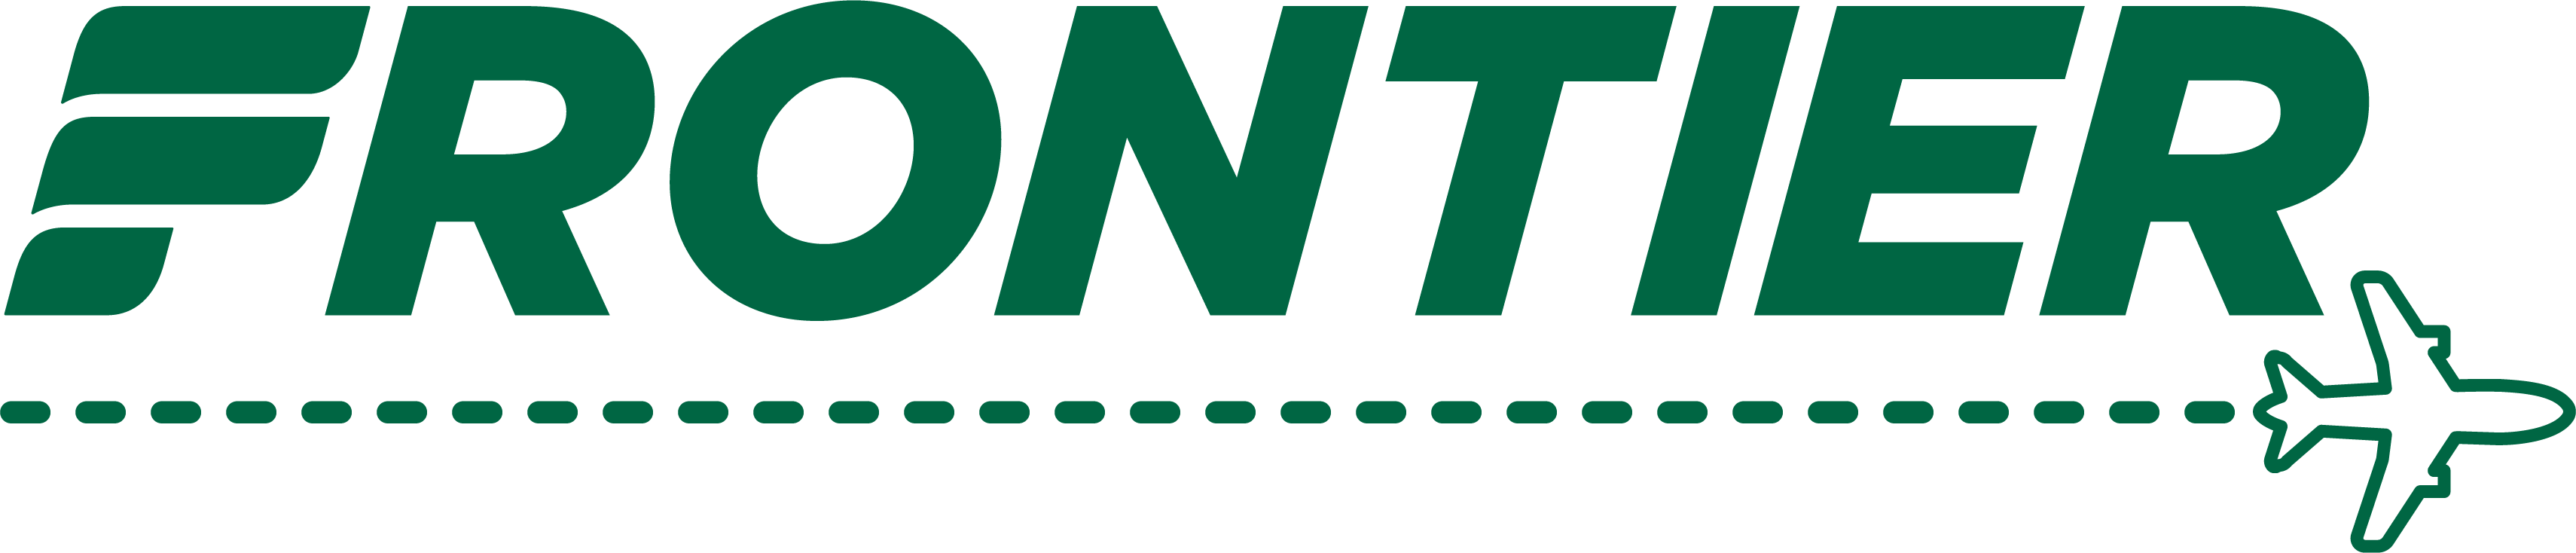 The Frontier Airlines logo.